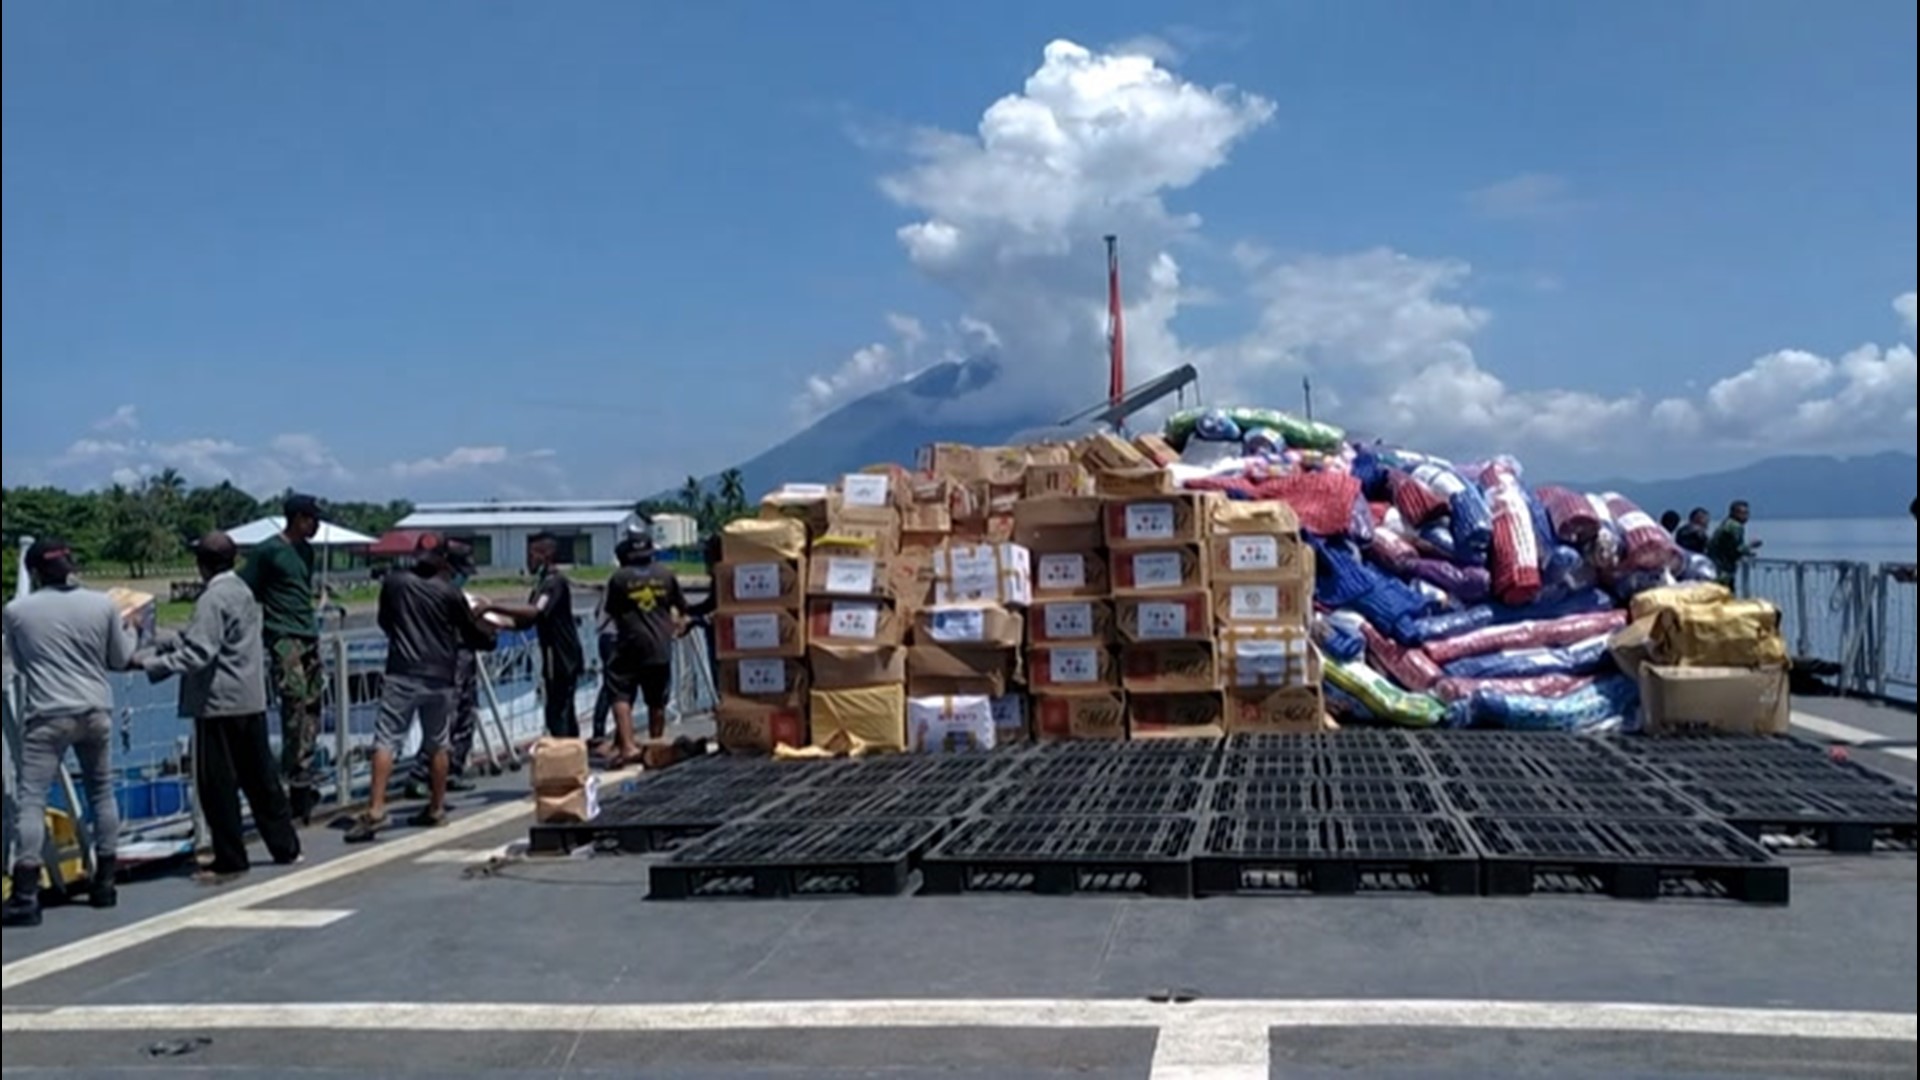 Aid arrived in Lembata, Indonesia, on April 8, for those impacted by a cyclone, which killed more than 200 people.